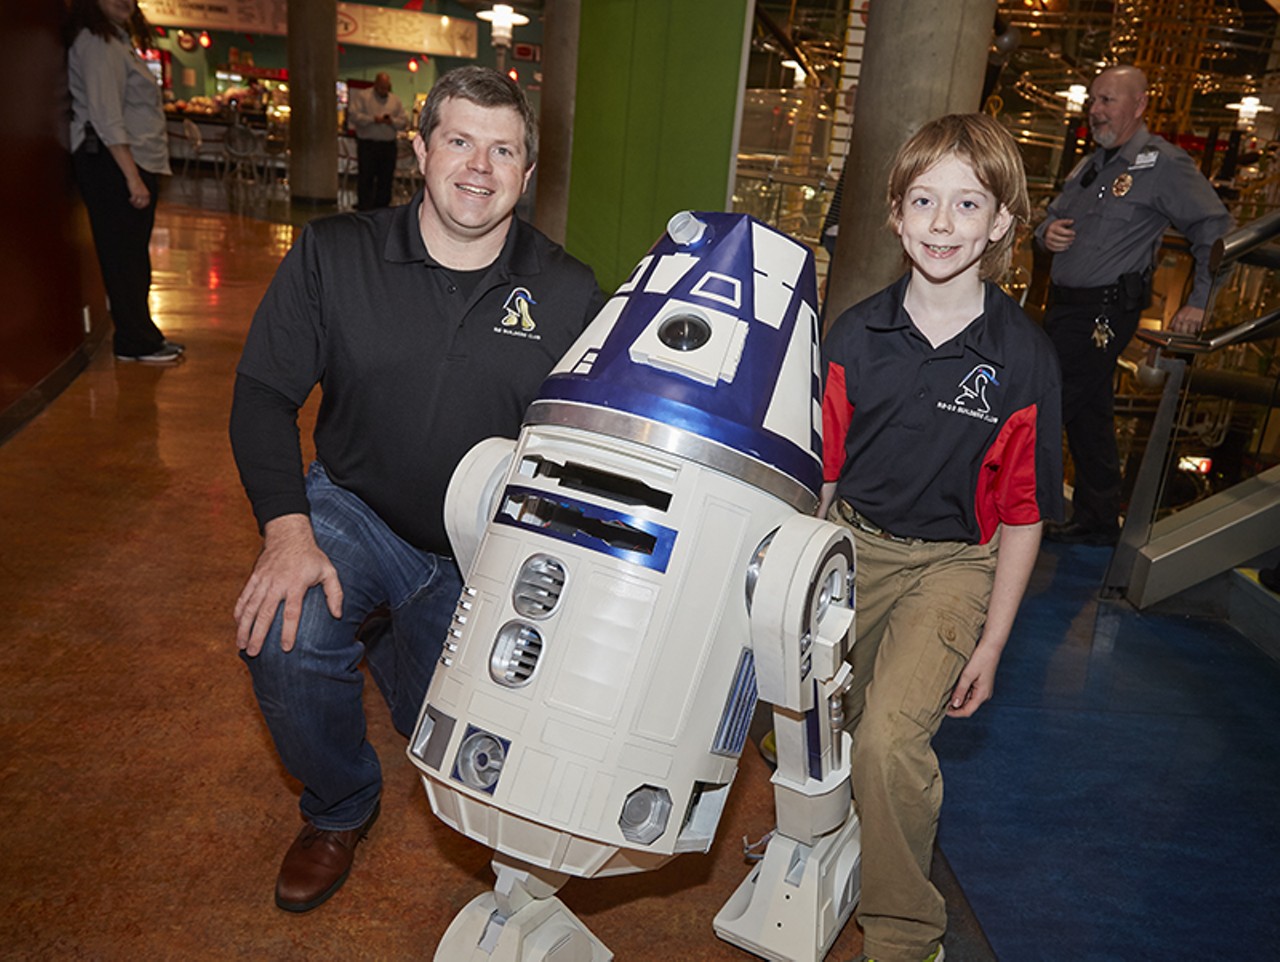 Craig and Justin Crawford, members of the R2 Builders Club of St. Louis, with the droid of the hour.